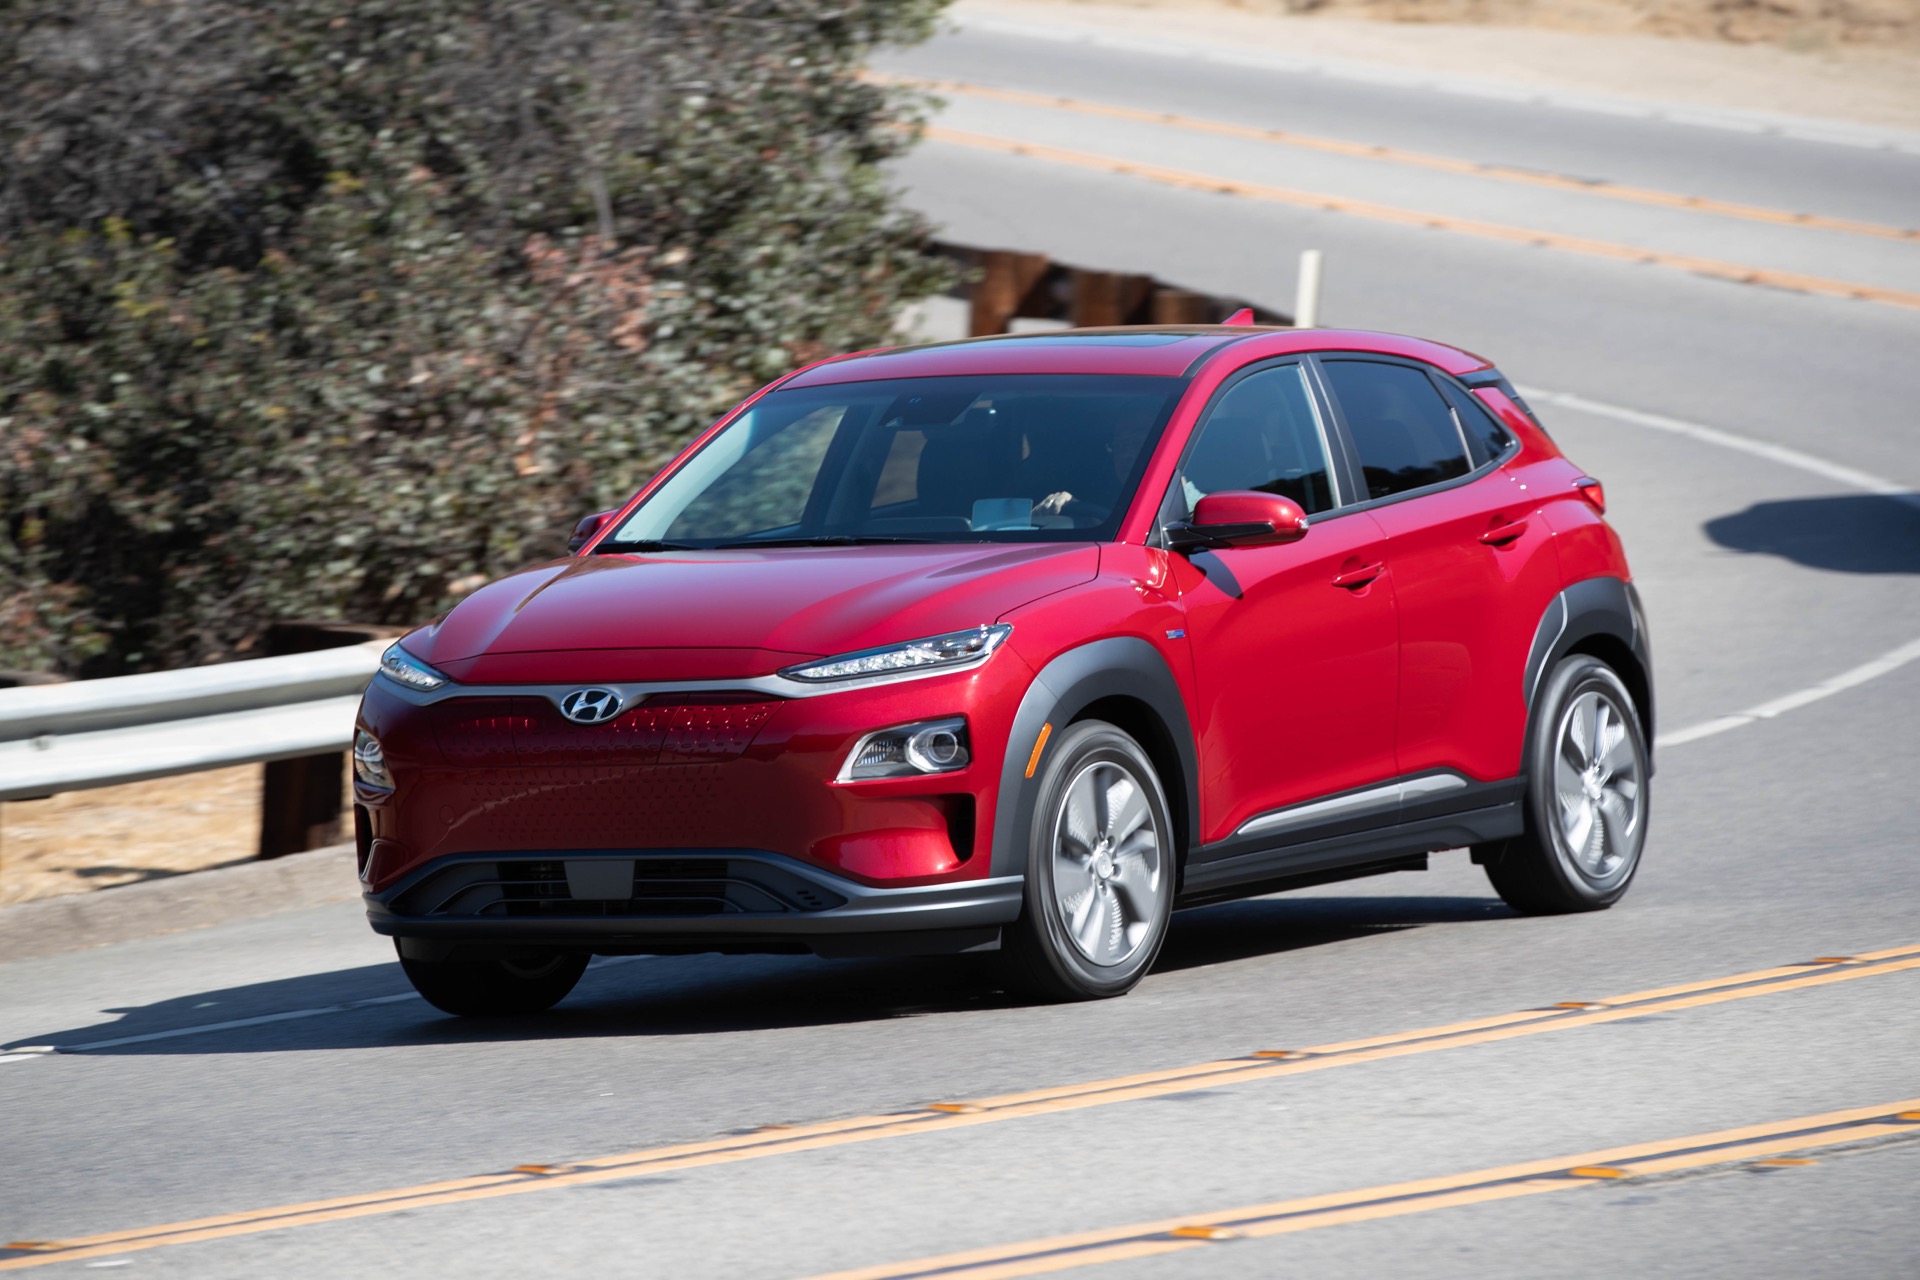 Hyundai Kona Electric and Nexo fuel cell SUV recalled for brake issue